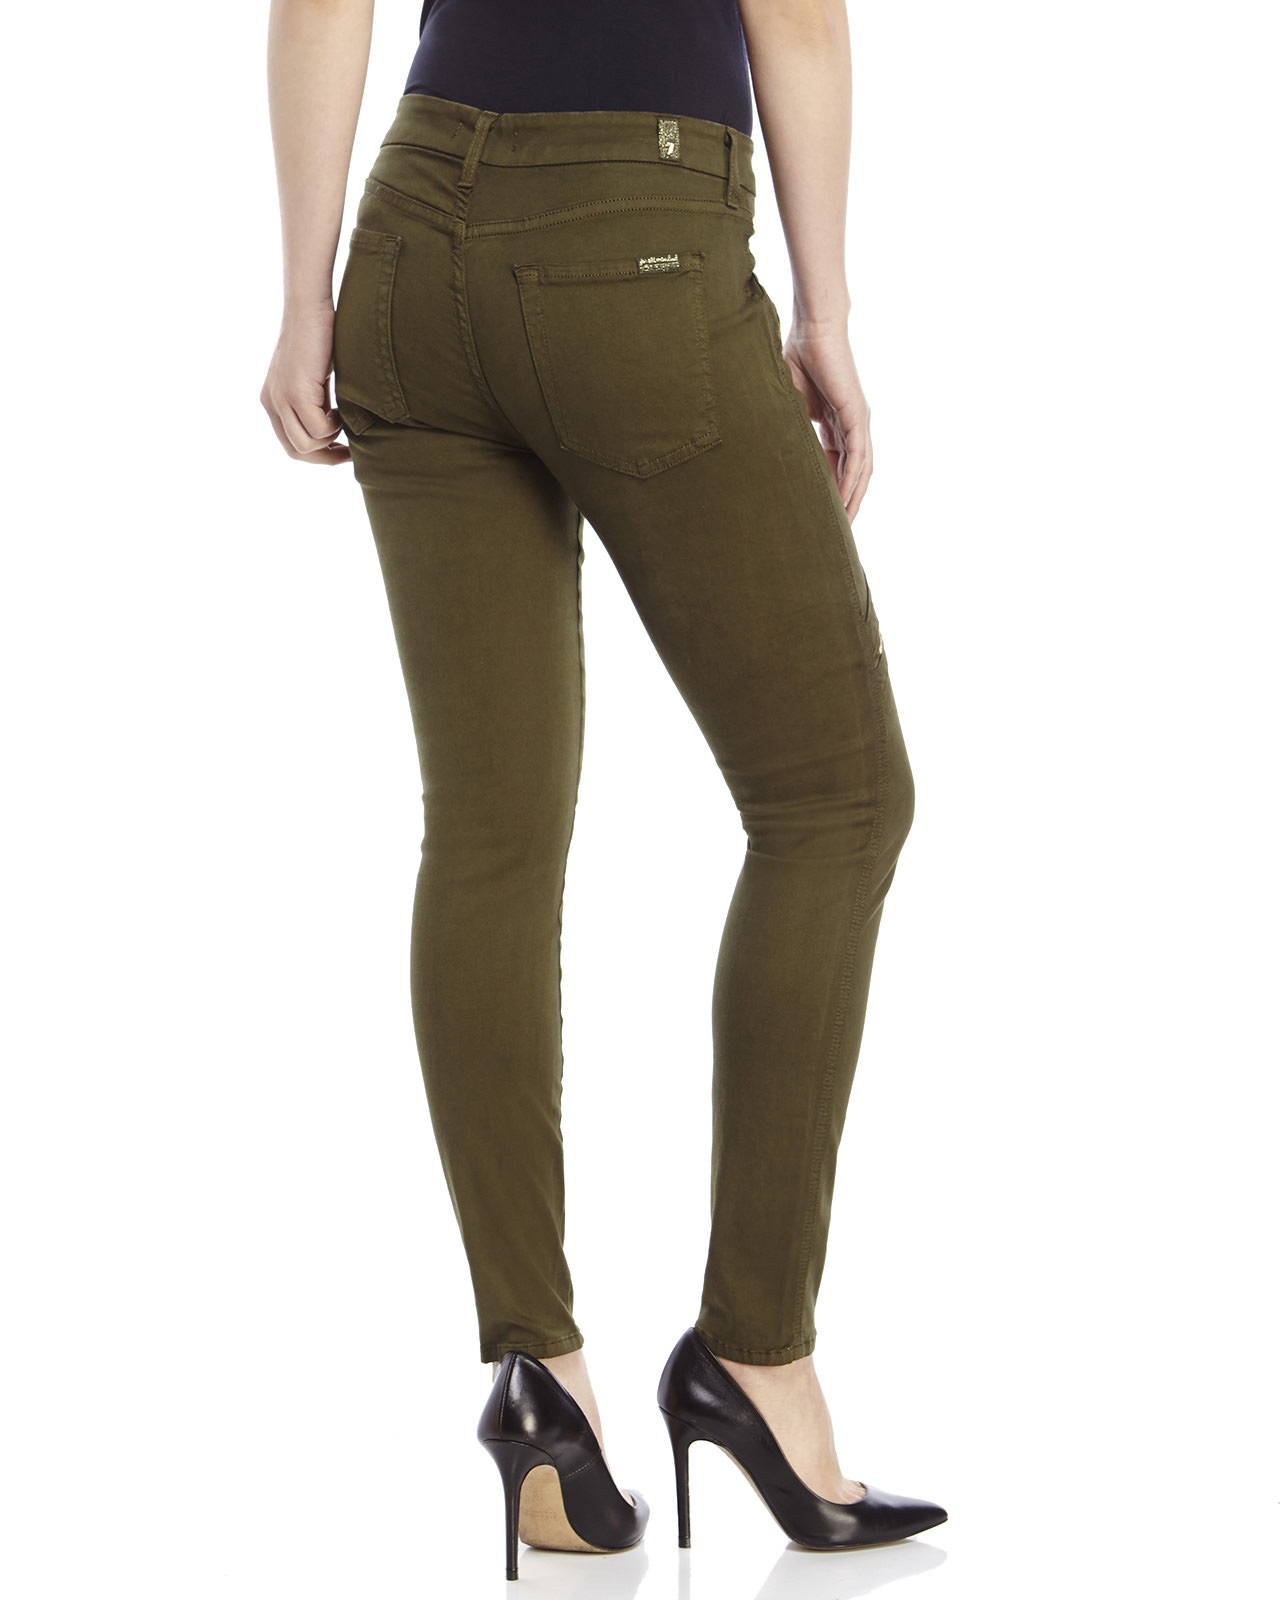 green skinny jeans with pockets jeans